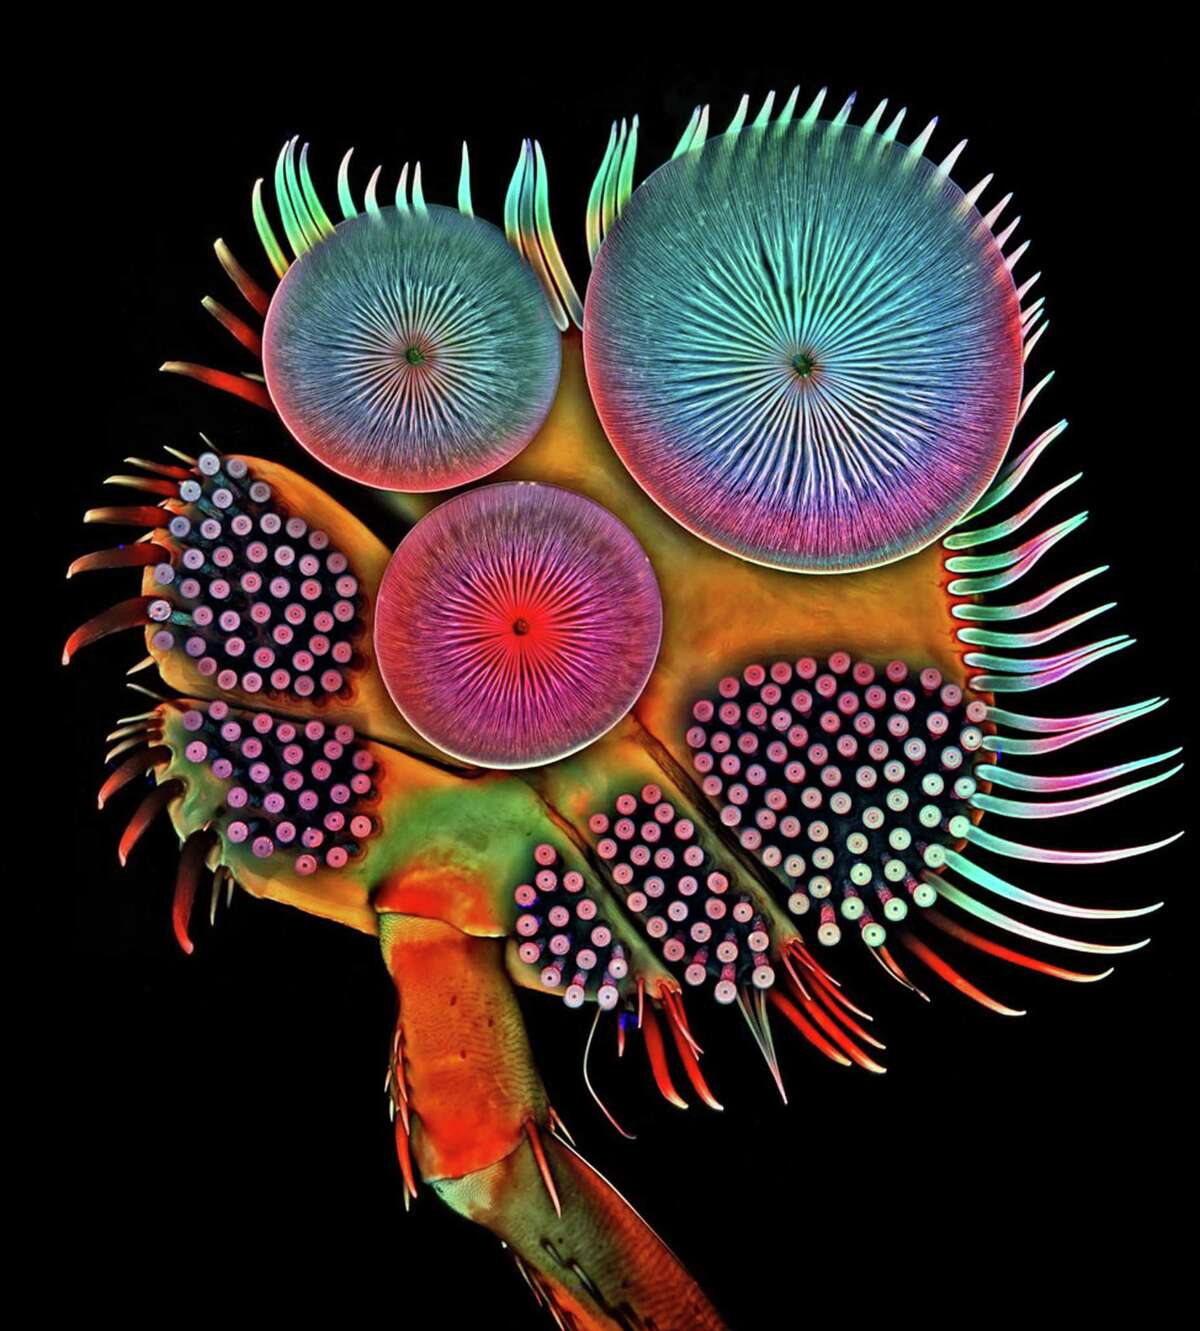 Fifth place in the international Nikon Small World Exhibit competition was awarded to Dr. Igor Siwanowicz, of the Howard Hughes Medical Institute Janelia Research Campus in Ashburn, Va., for his photo of the front foot of a male diving beetle. It is on view at the Bruce Museum in Greenwich.